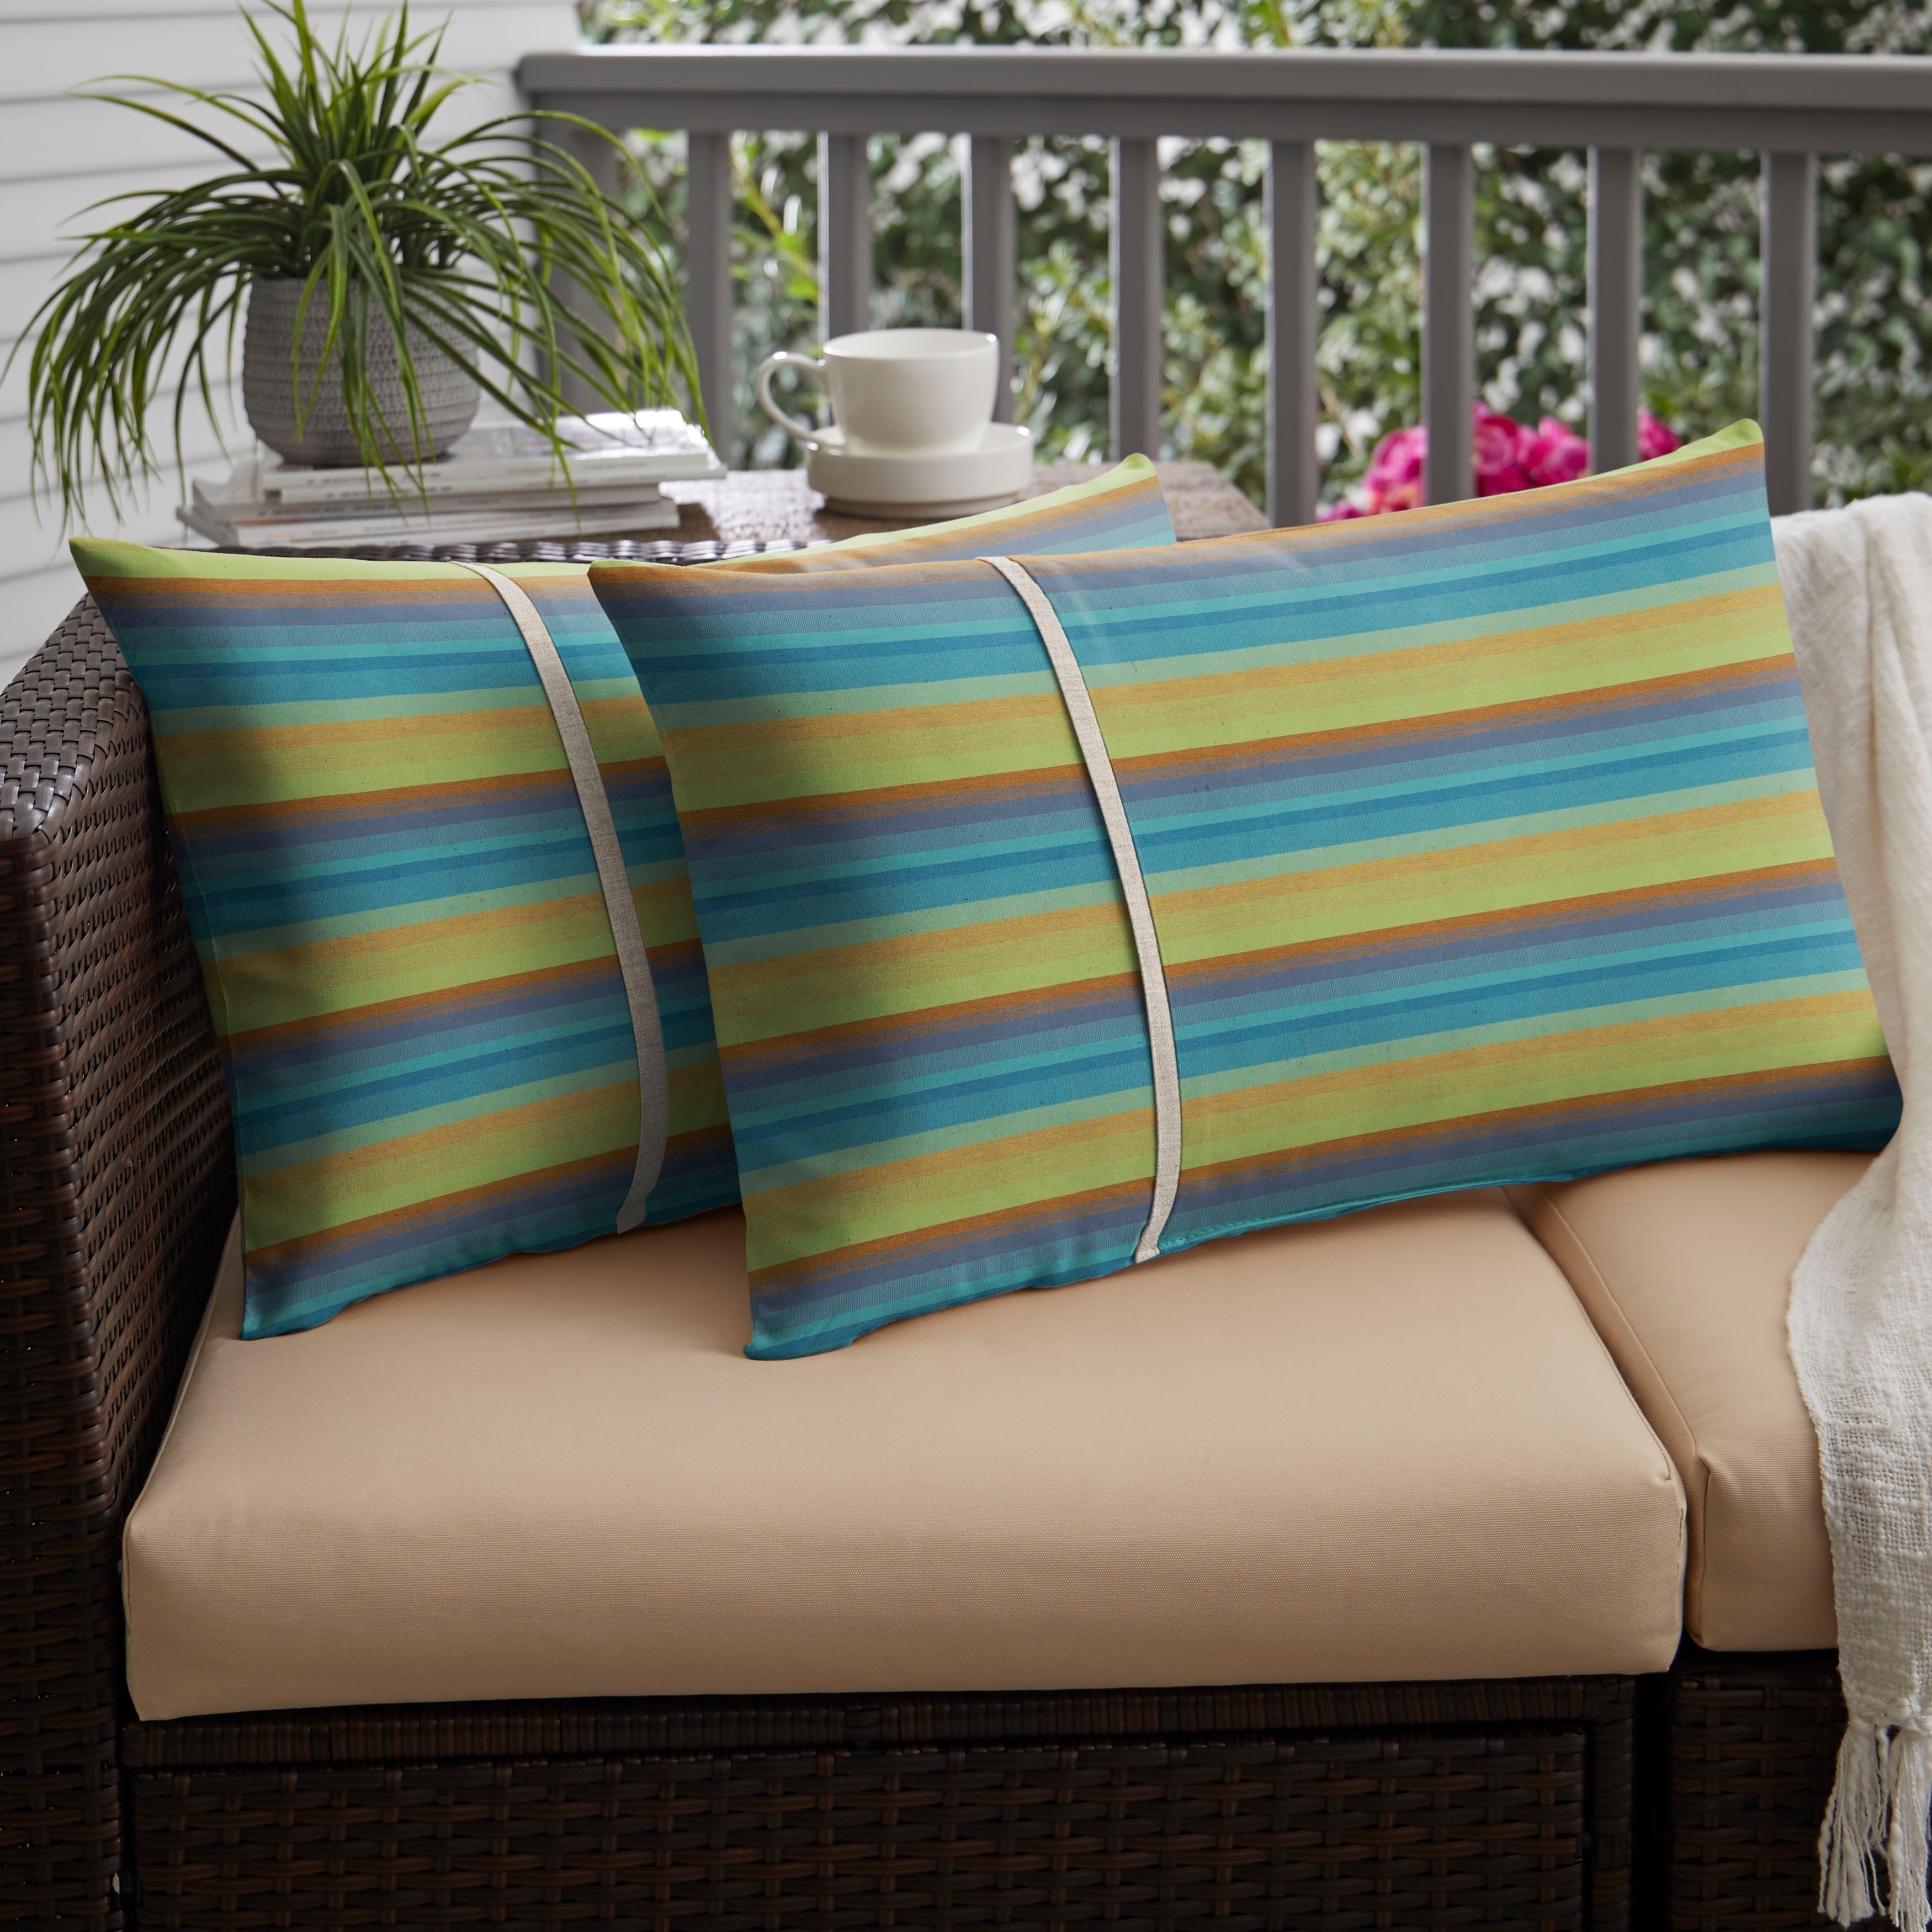 https://ak1.ostkcdn.com/images/products/28896172/Sunbrella-Blue-Stripe-with-Silver-Grey-Indoor-Outdoor-Lumbar-Pillows-Set-of-2-16-in-H-x-26-in-W-354fadef-f159-4a27-894d-d21e978699f7.jpg